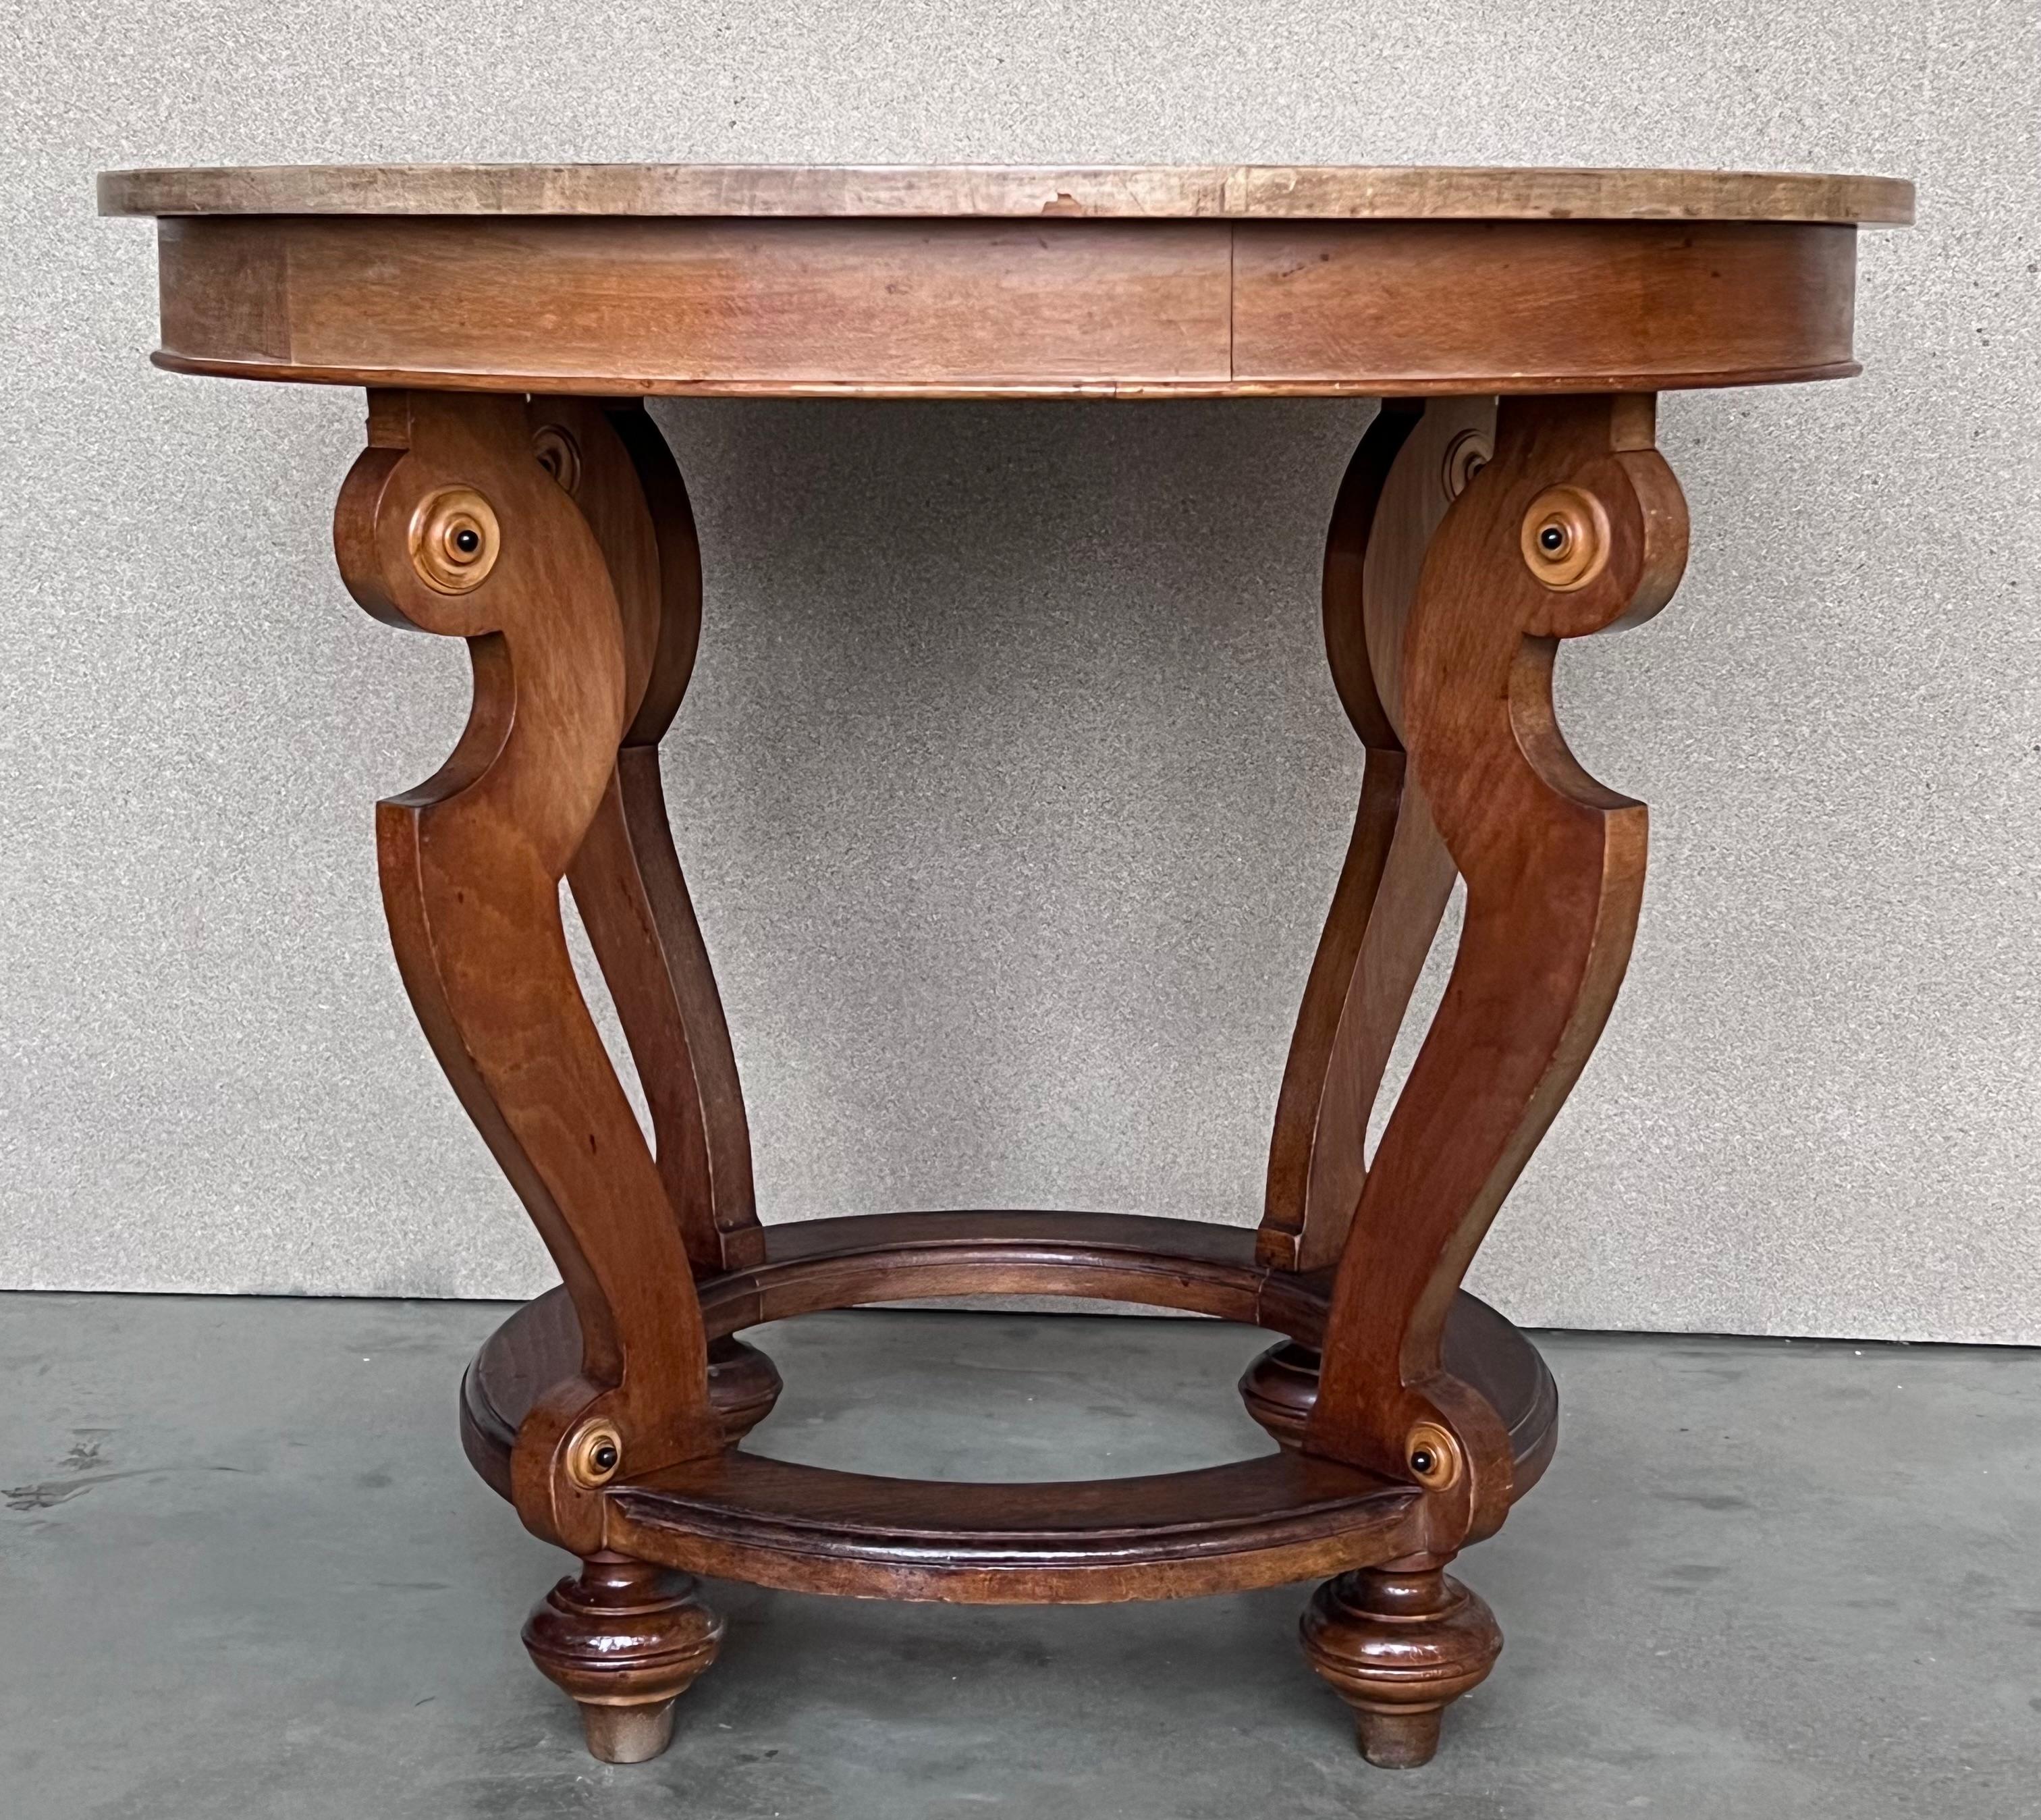 20th marquetry round center table with four cabriole legs.

We have two pieces available.